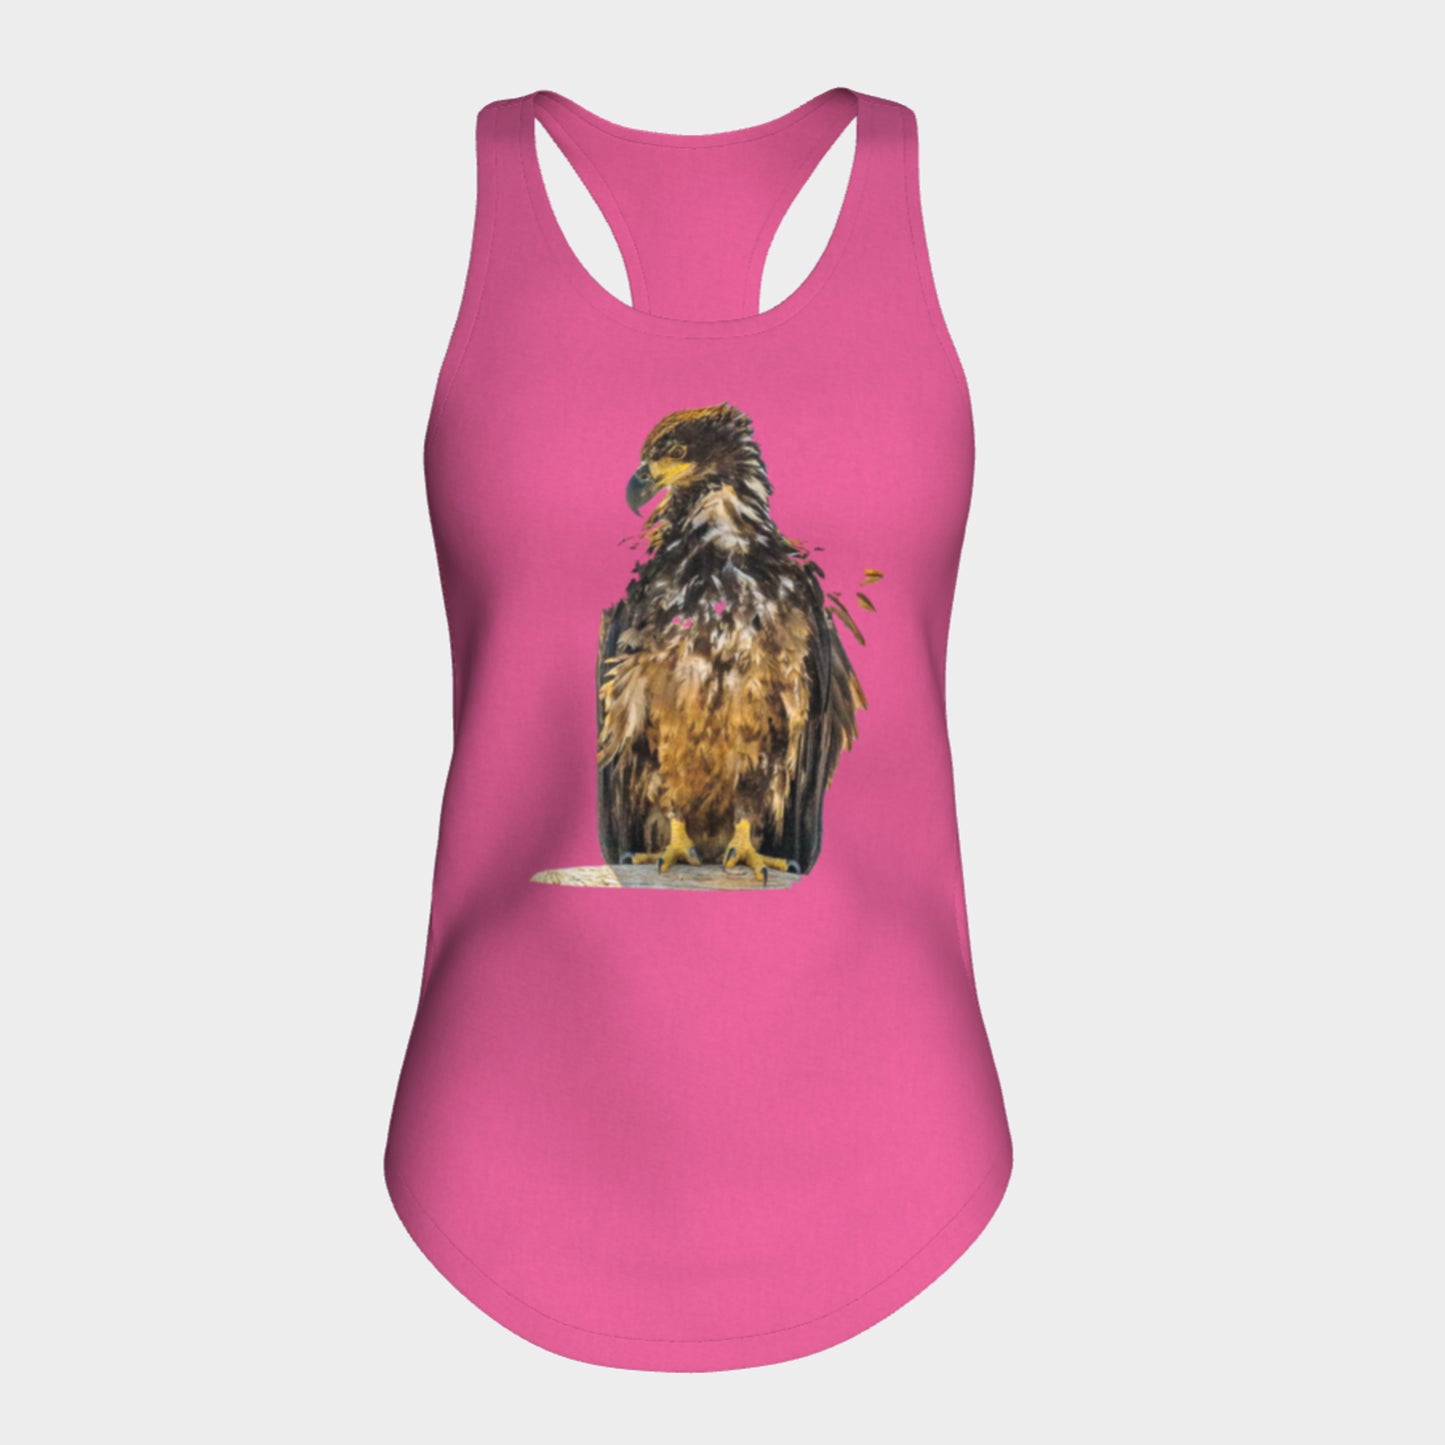 Van Isle Goddess Next Level racerback tank top will quickly become you go-to tank top because of the super comfy fit!